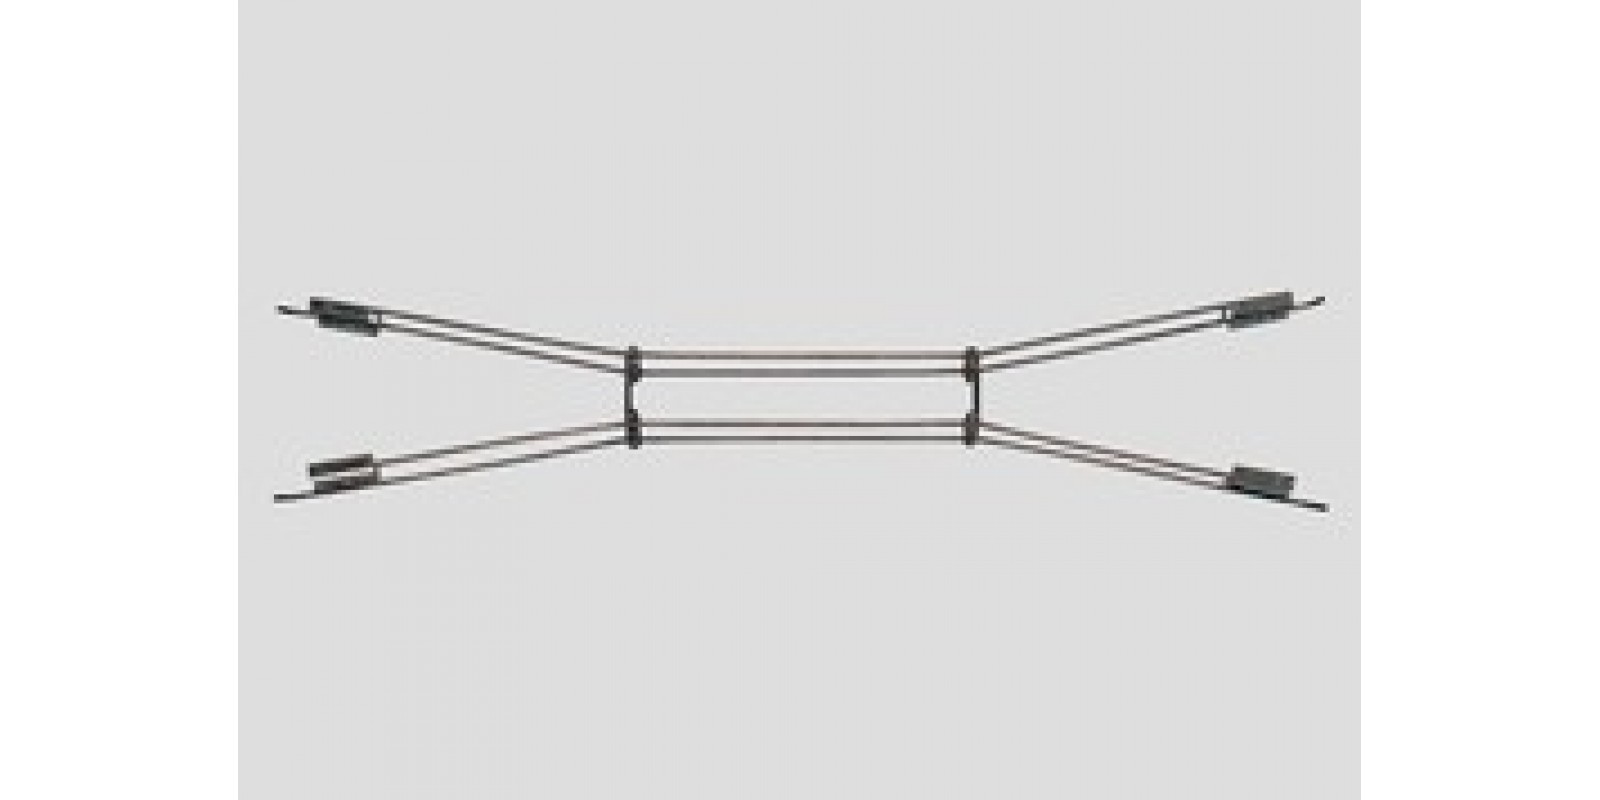 070131 Catenary Wire for Crossings and Double Slip Switches. Gauge H0 